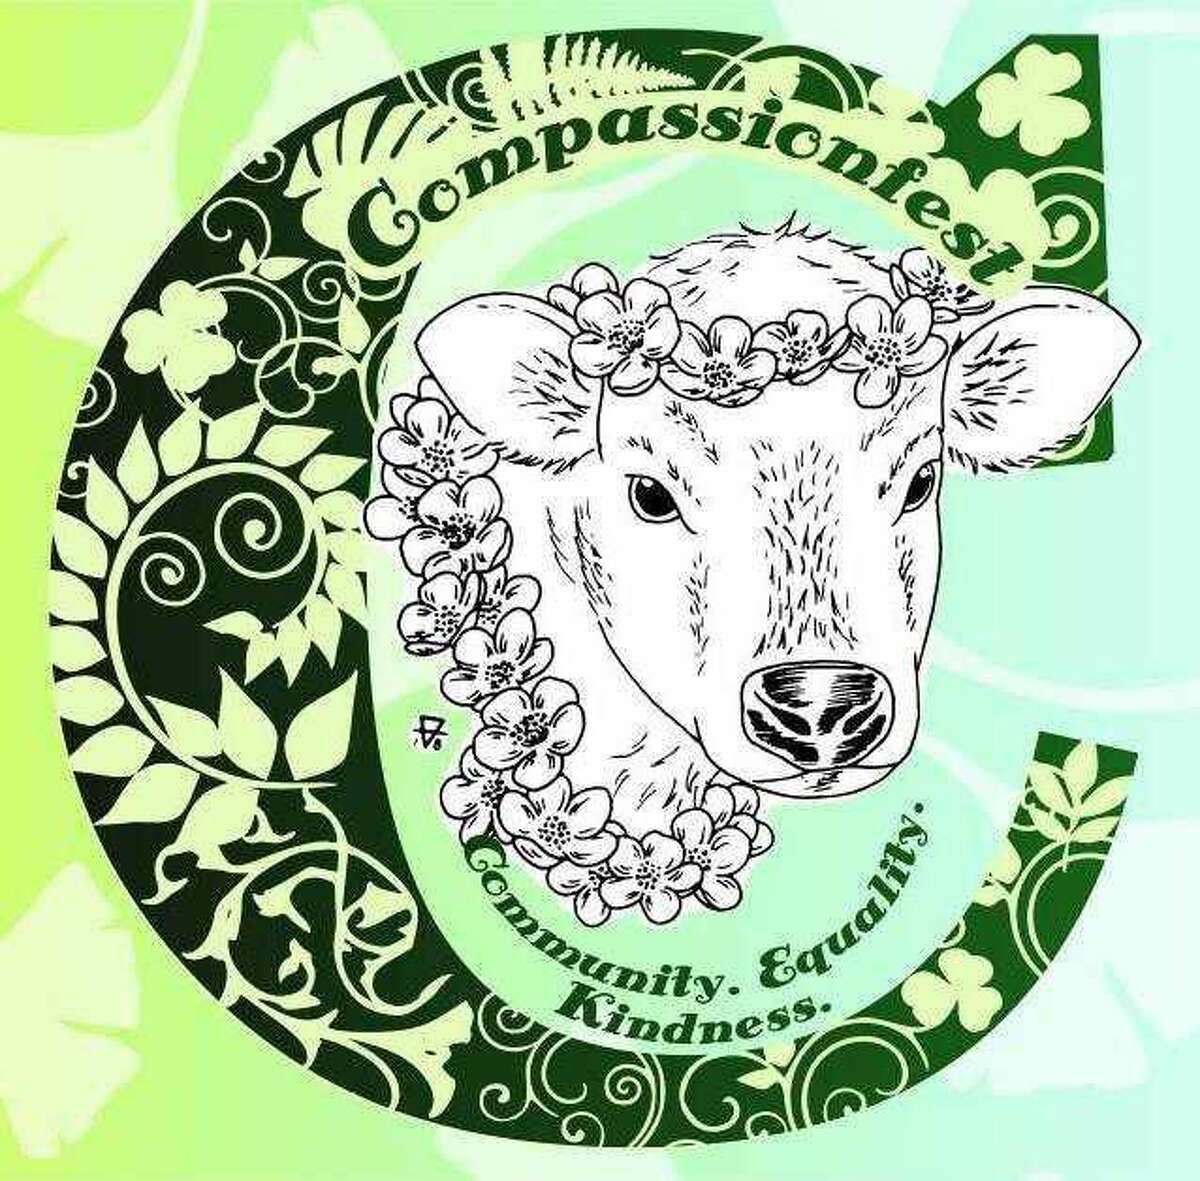 Compassionfest aims to promote "community, equality and kindness."